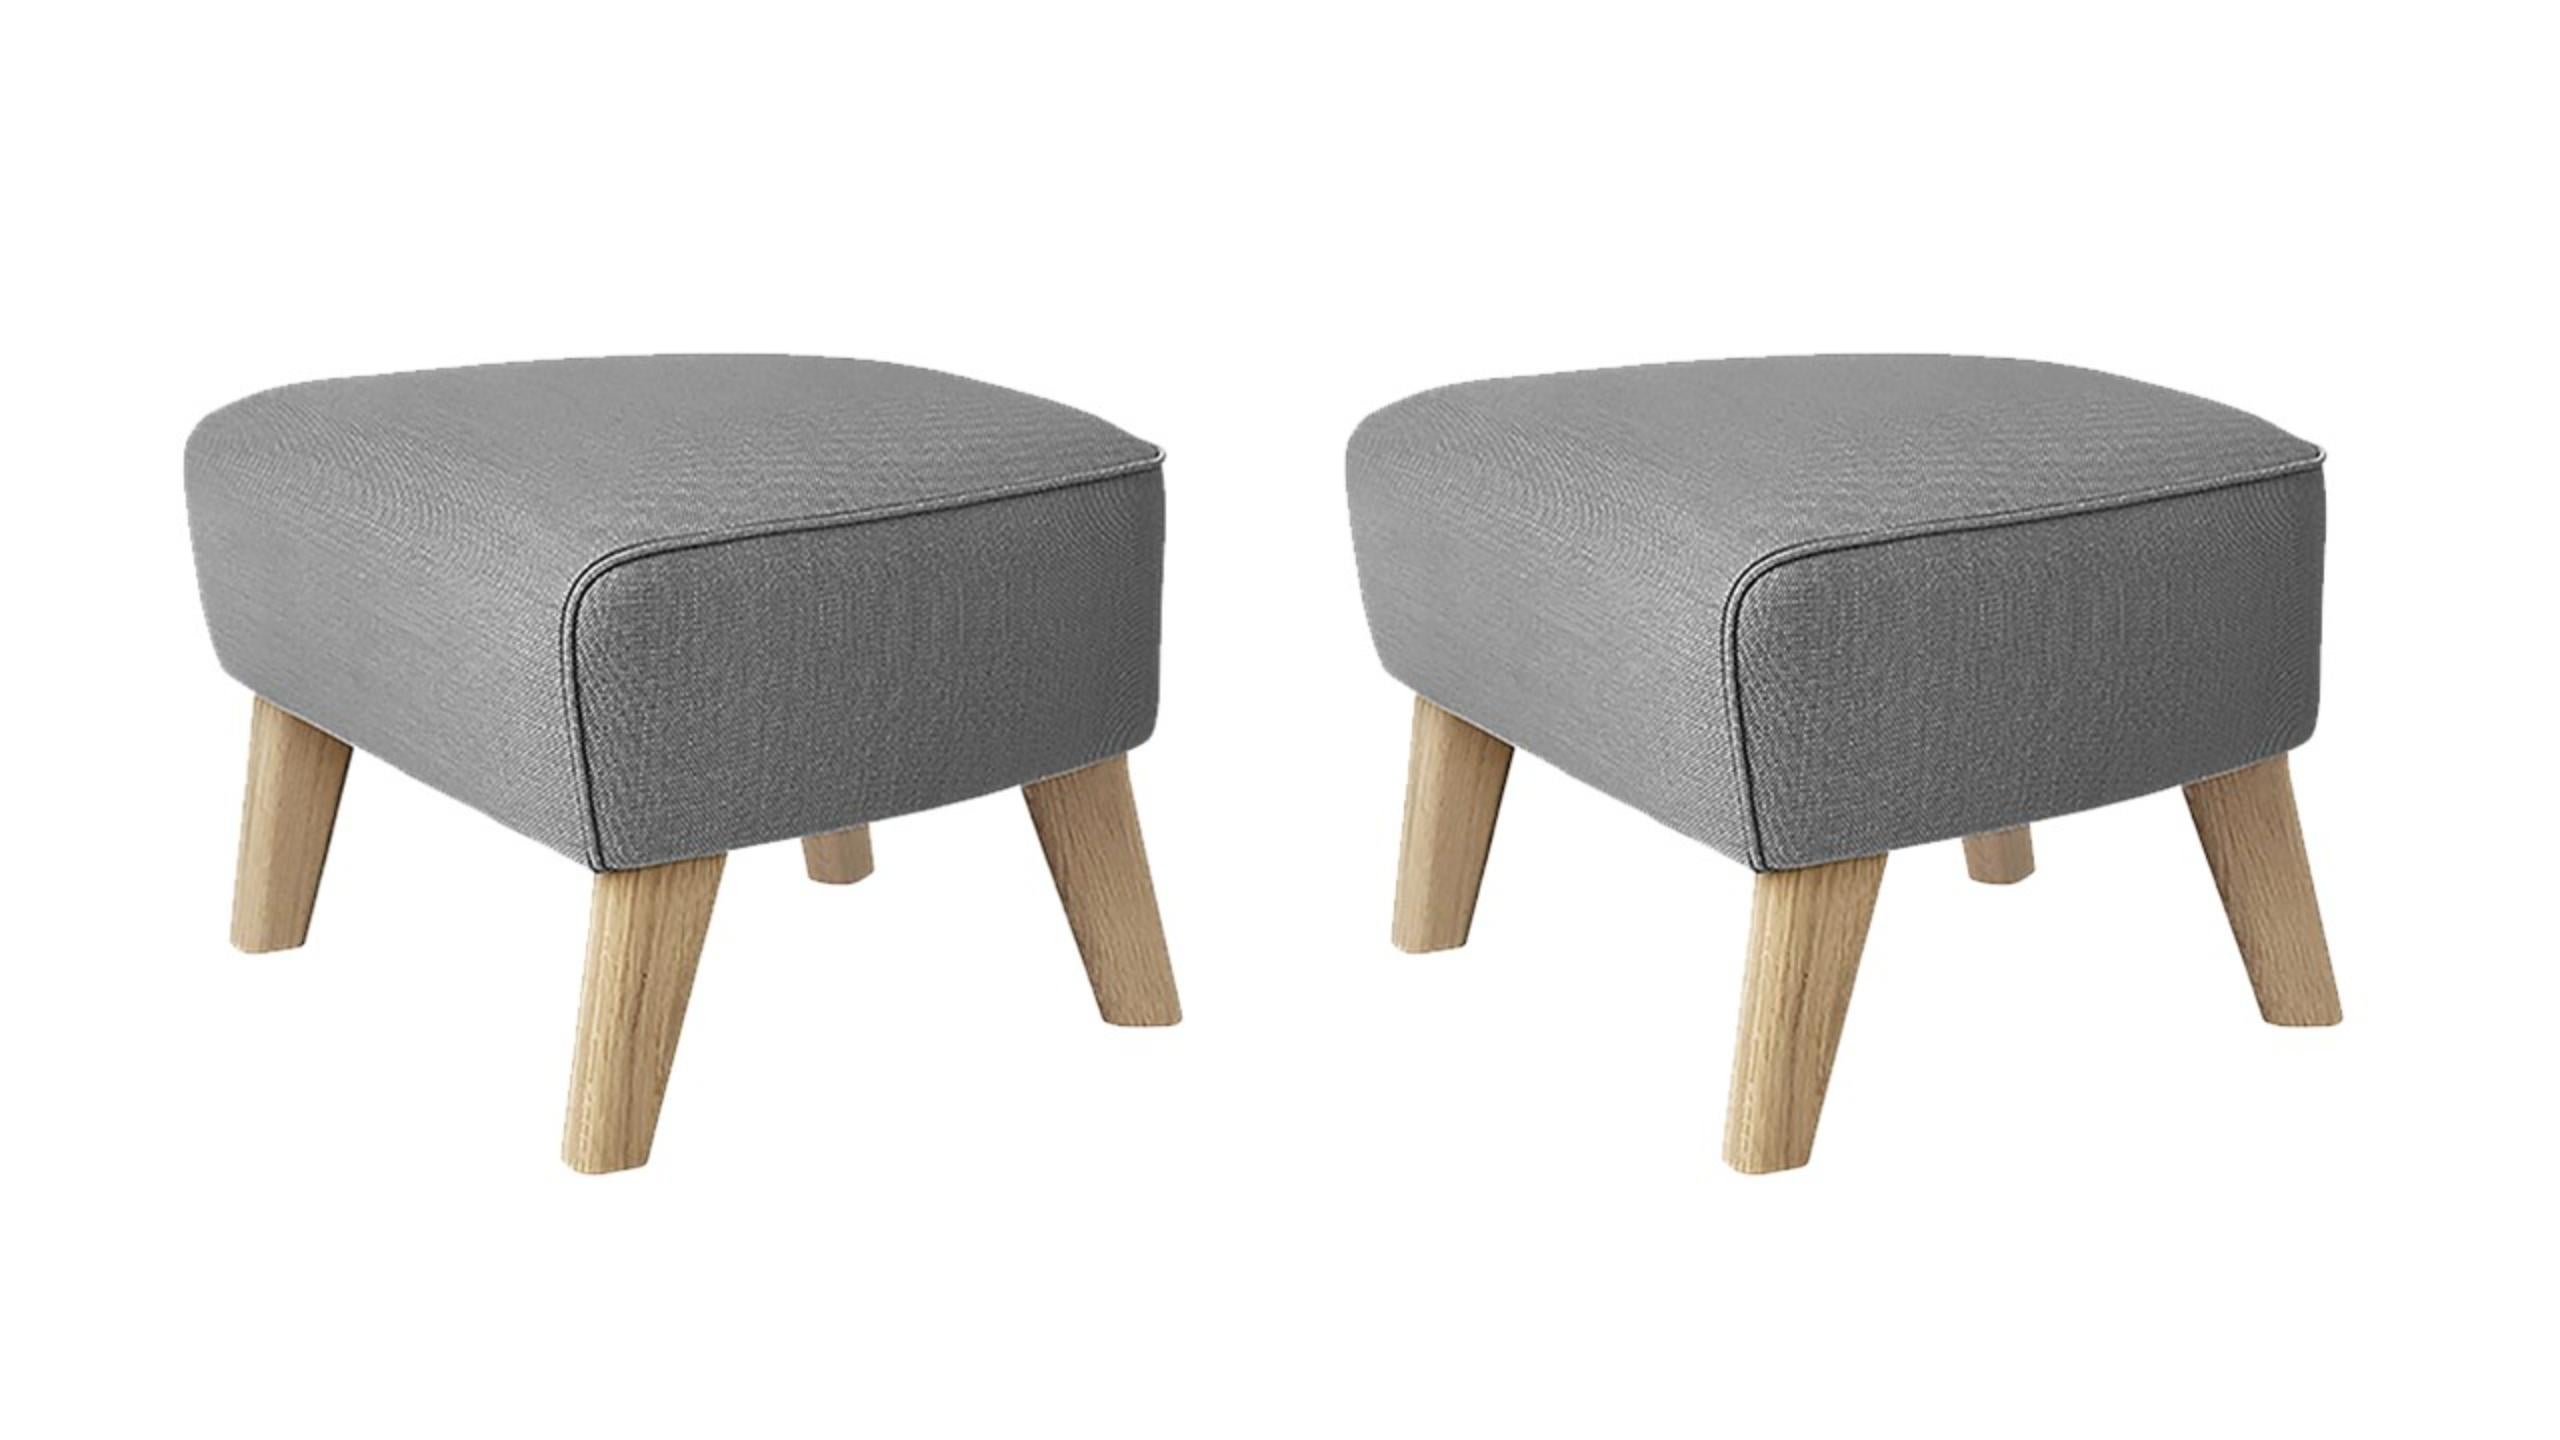 Set of 2 grey and natural Oak Sahco zero footstool by Lassen
Dimensions: w 56 x d 58 x h 40 cm 
Materials: Textile
Also Available: Other colors available.

The My Own chair footstool has been designed in the same spirit as Flemming Lassen’s